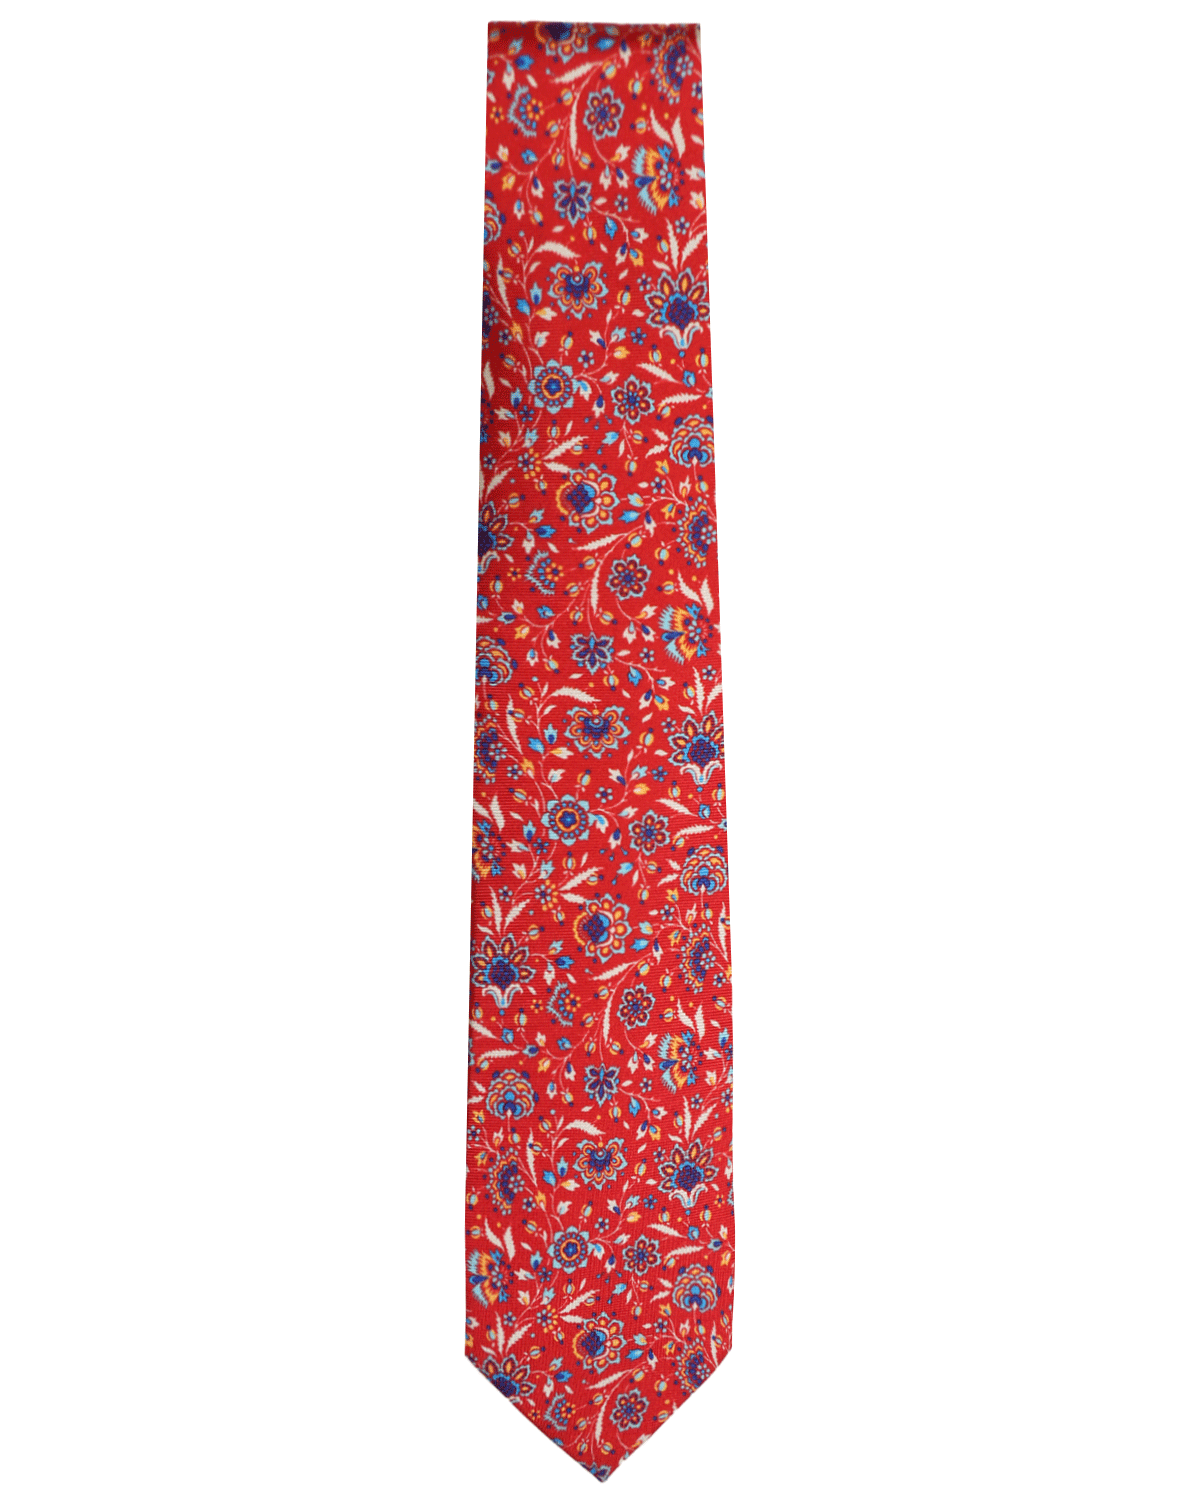 Red and Blue Floral Print Silk Tie